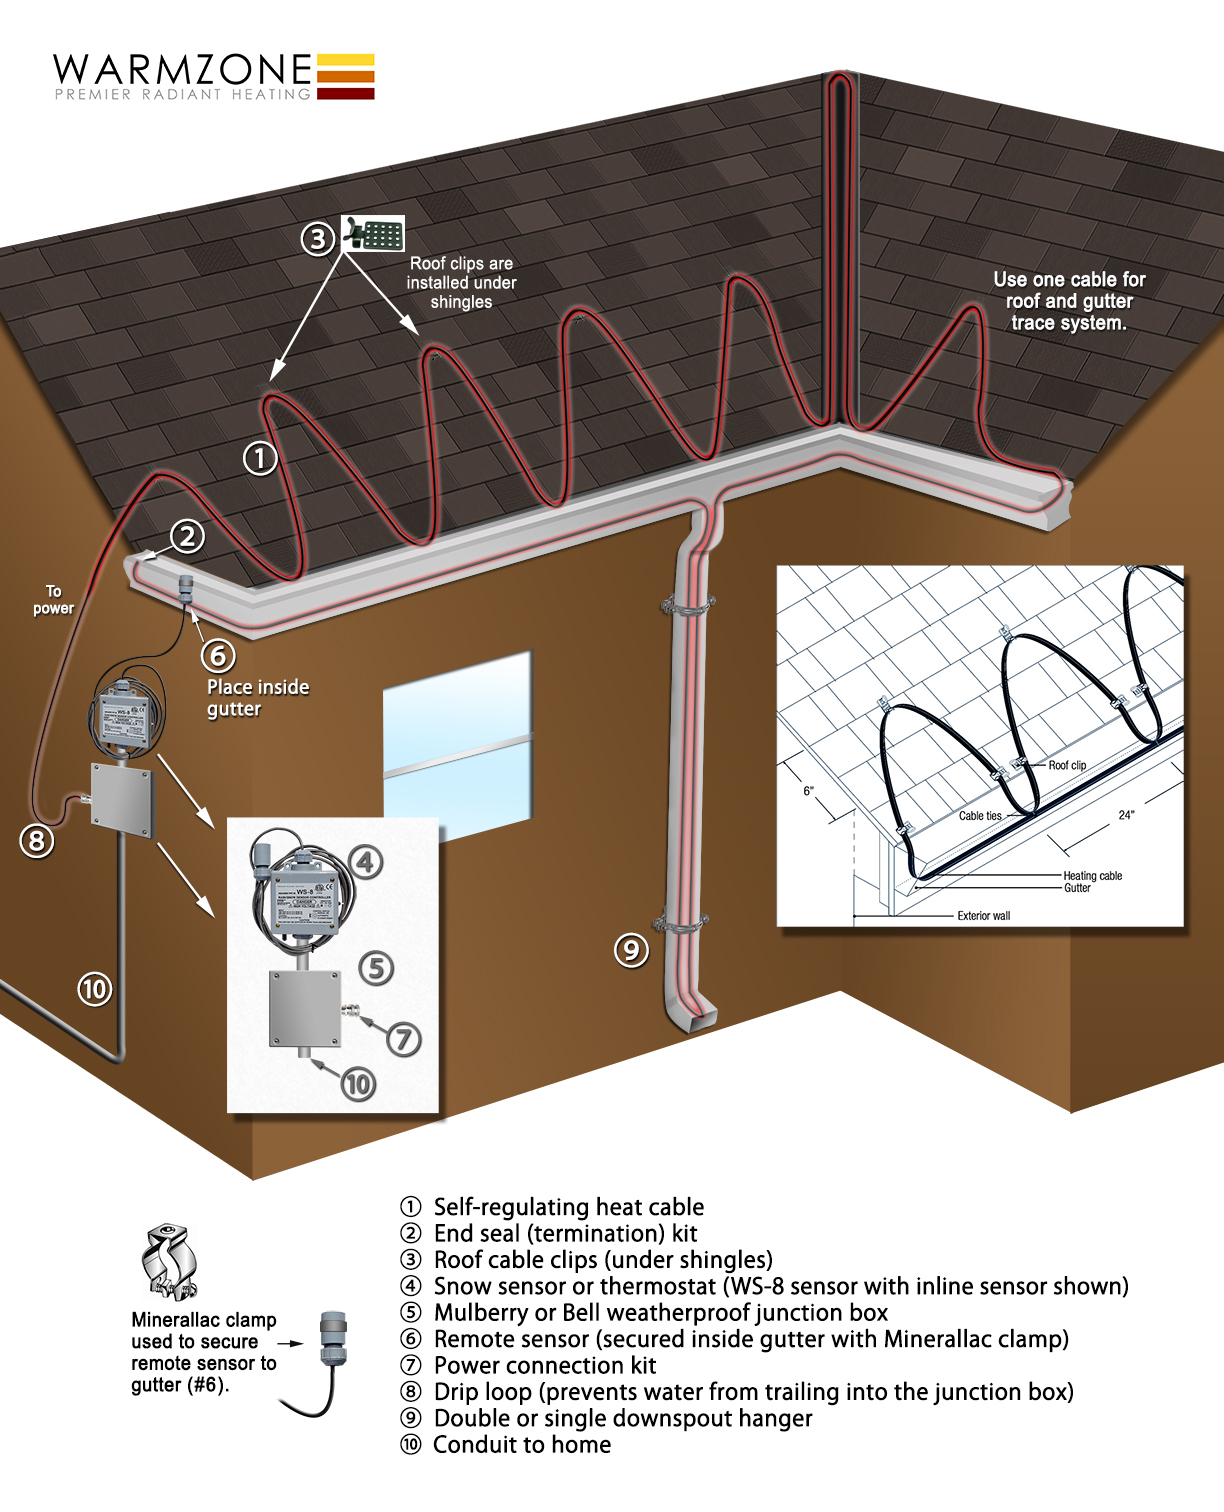 Overview of a roof heat trace system installed along roof edges, gutters and downspouts.